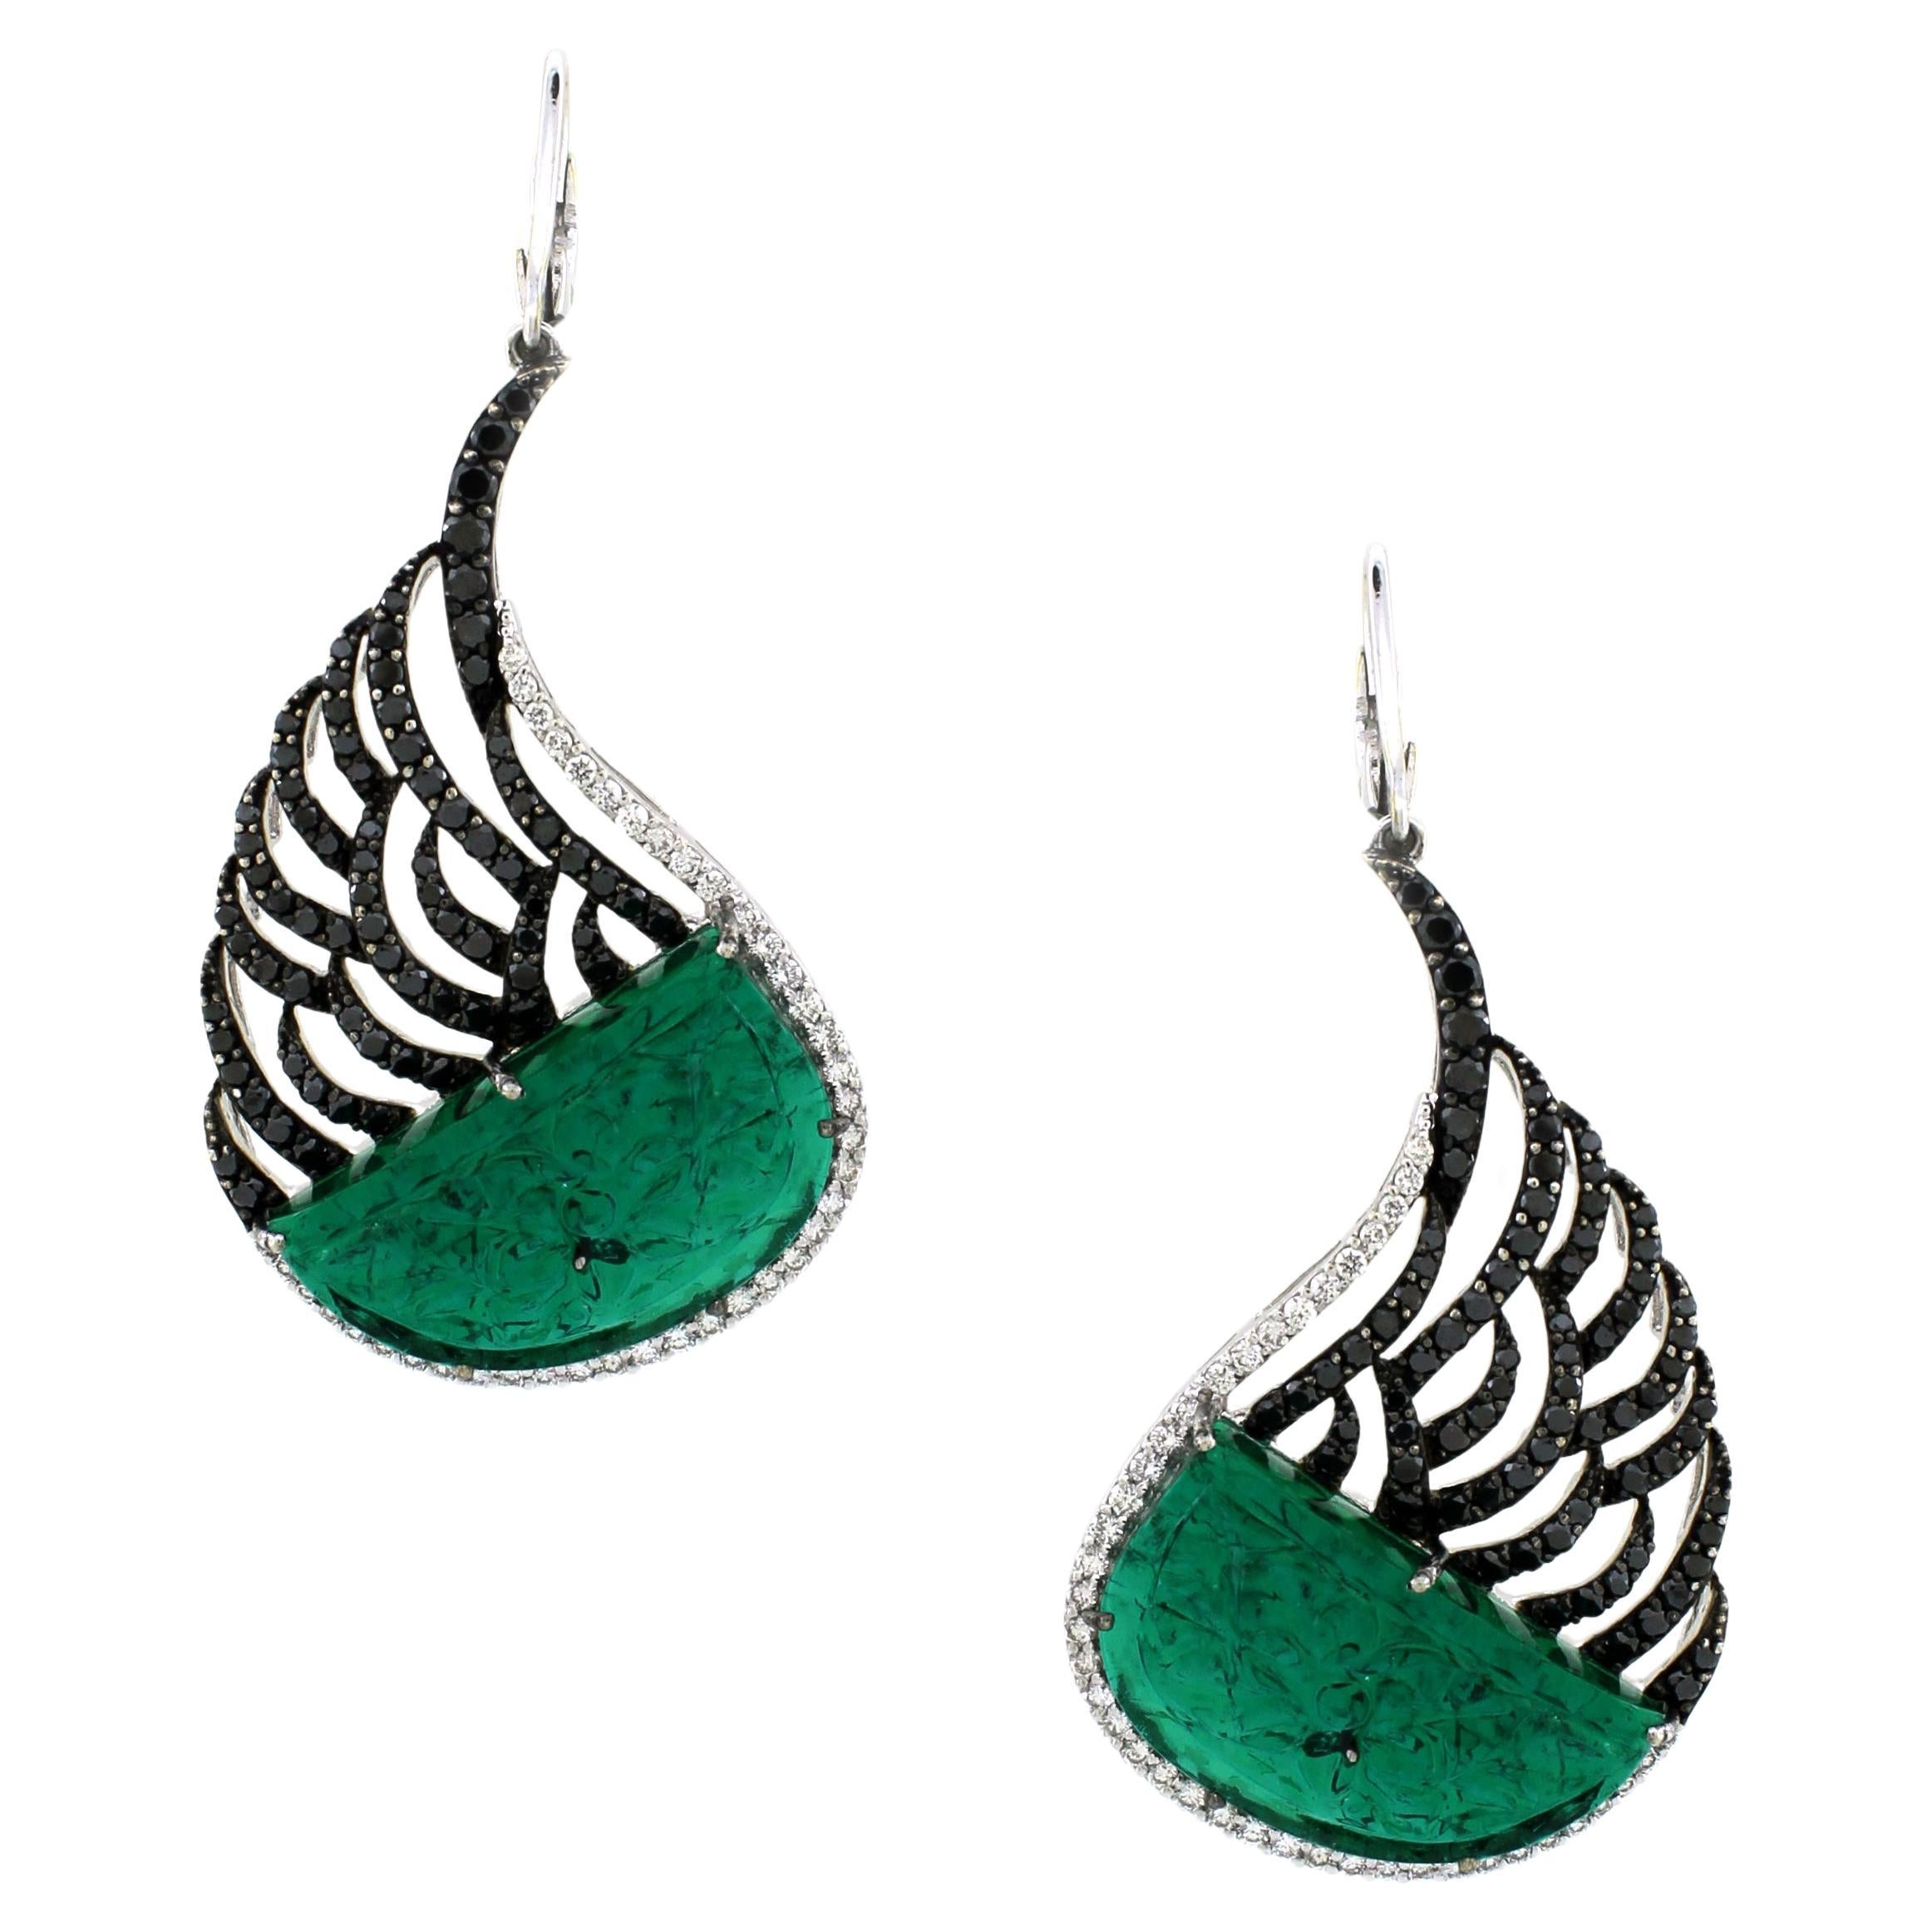 20.73 carats of Emerald Feather Inspired Earrings